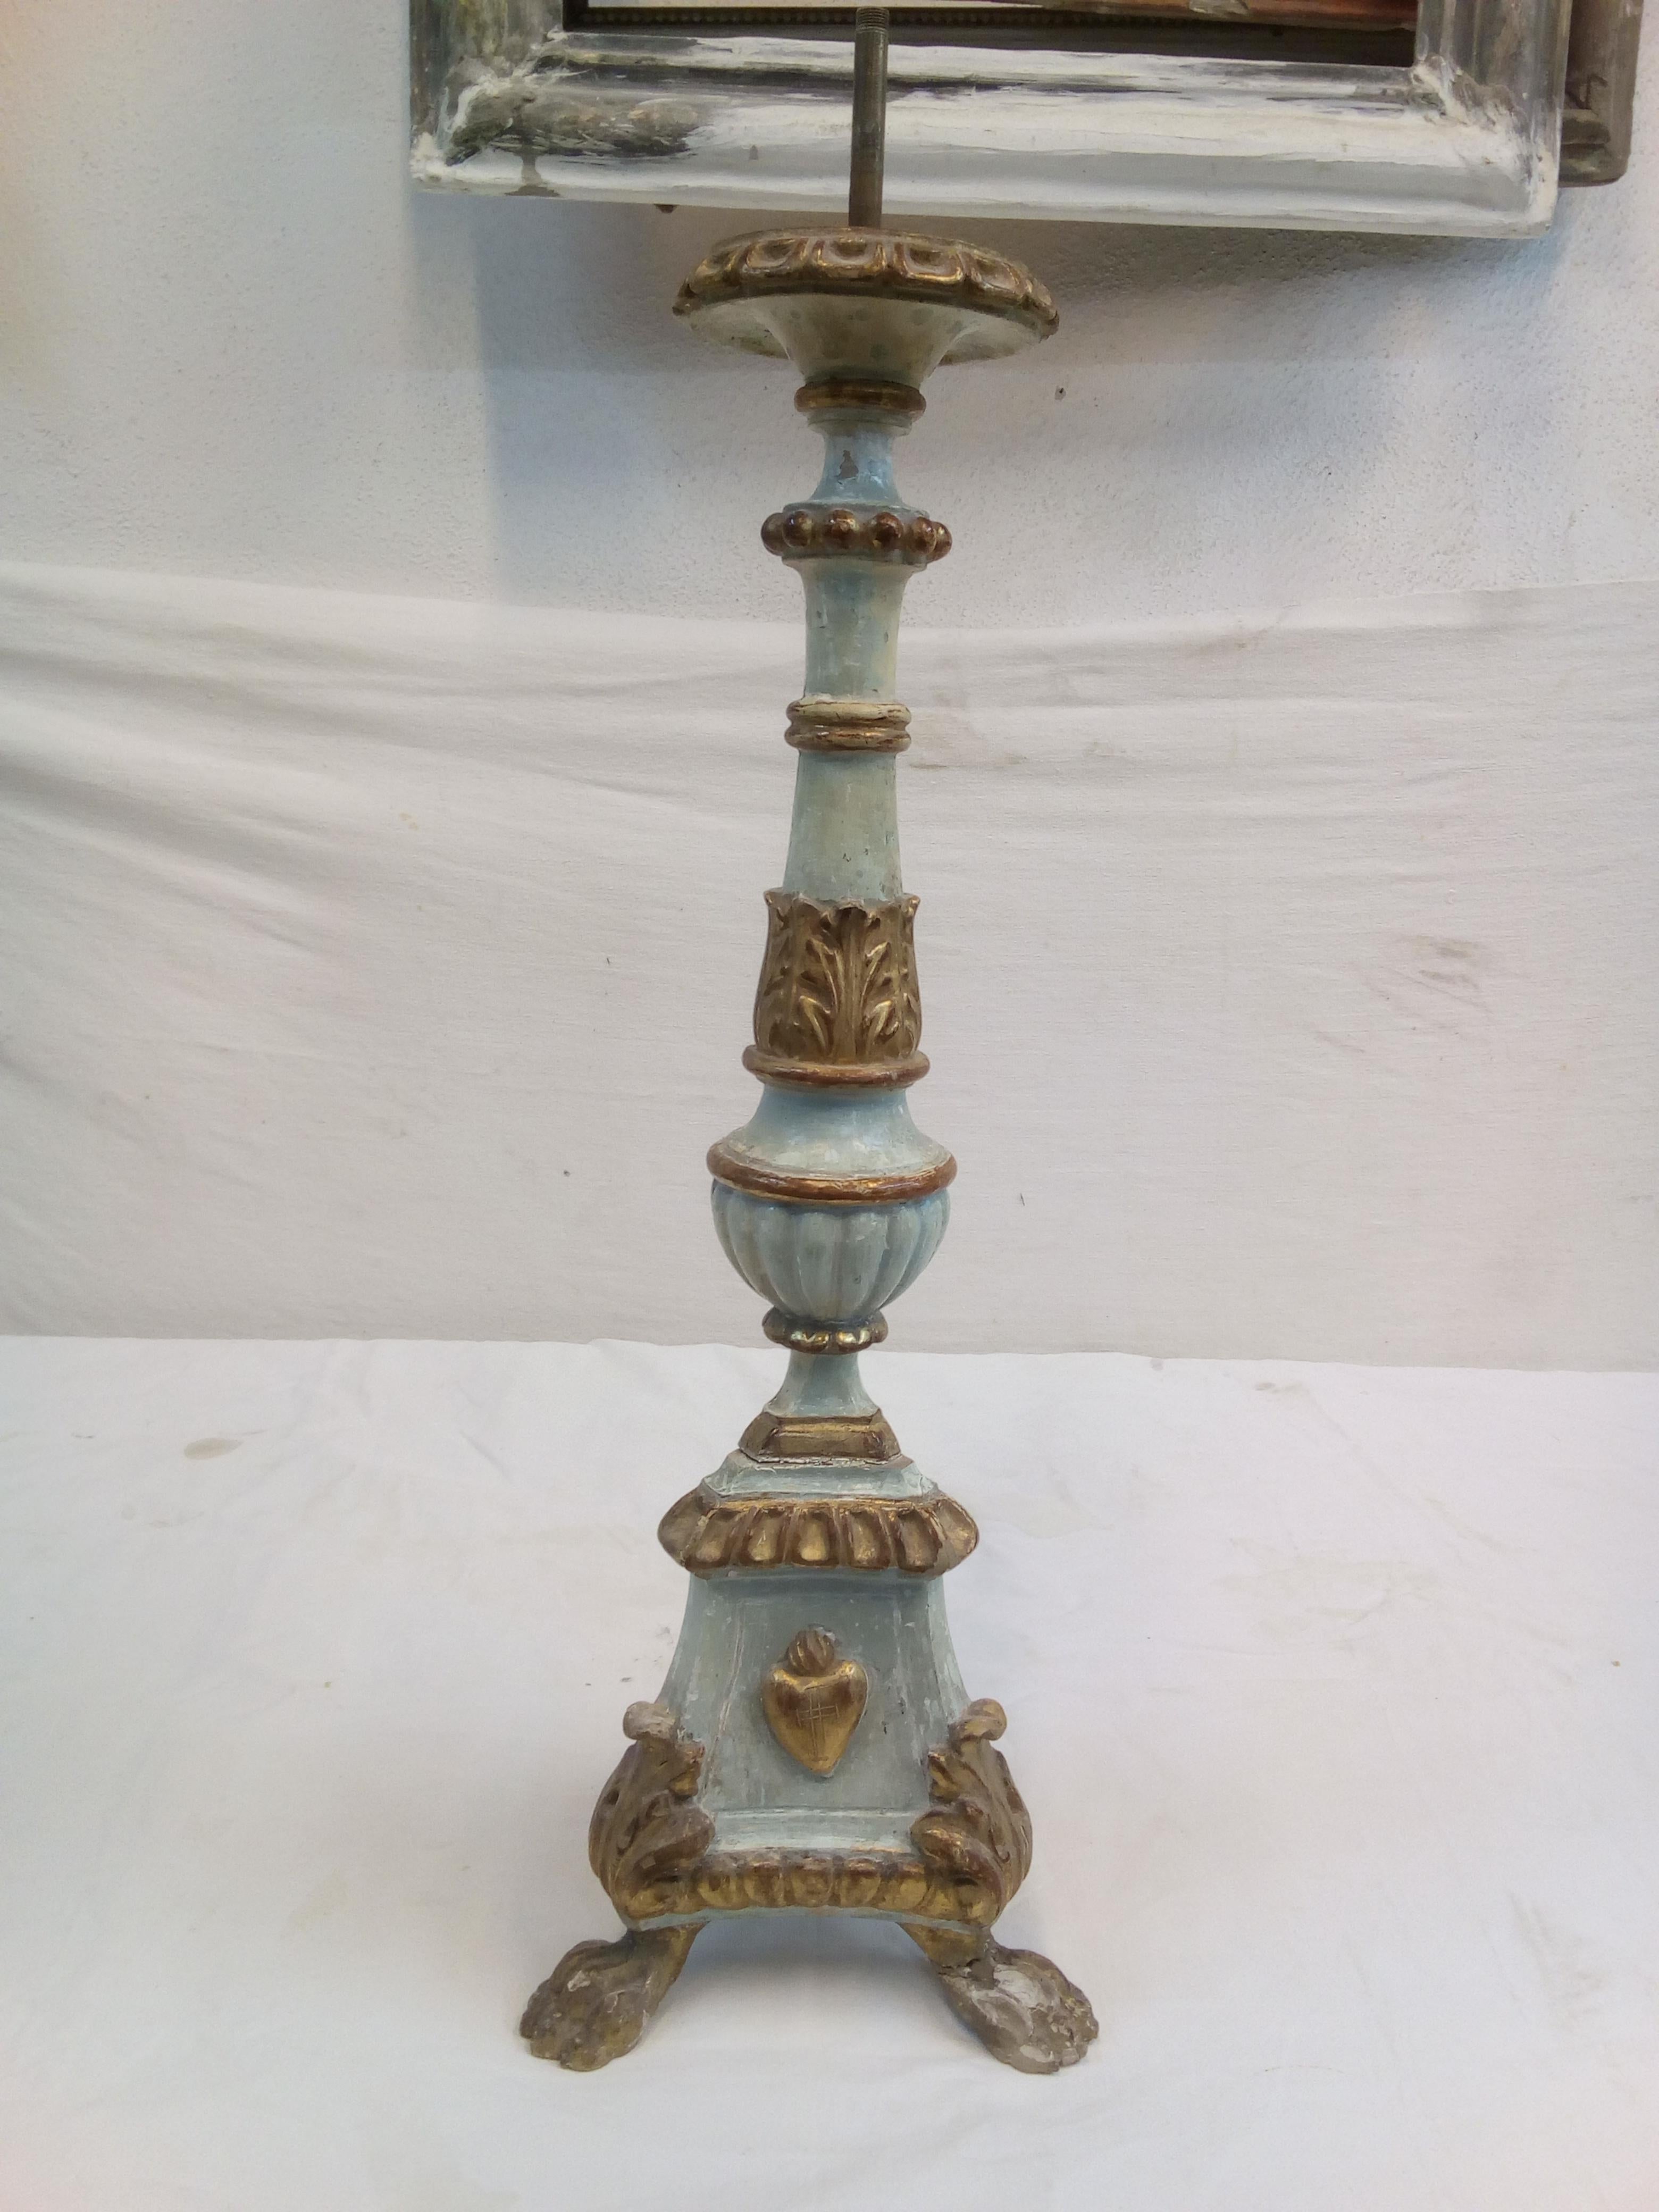 Description:
Front side
18th century Italian wood candelabra of order of the sacred heart . Feet with a lion's paw in gilded wood. The base is carved with gilded wood leaf motif. Body is painted with lacquer colored heavenly with coat of arms of the